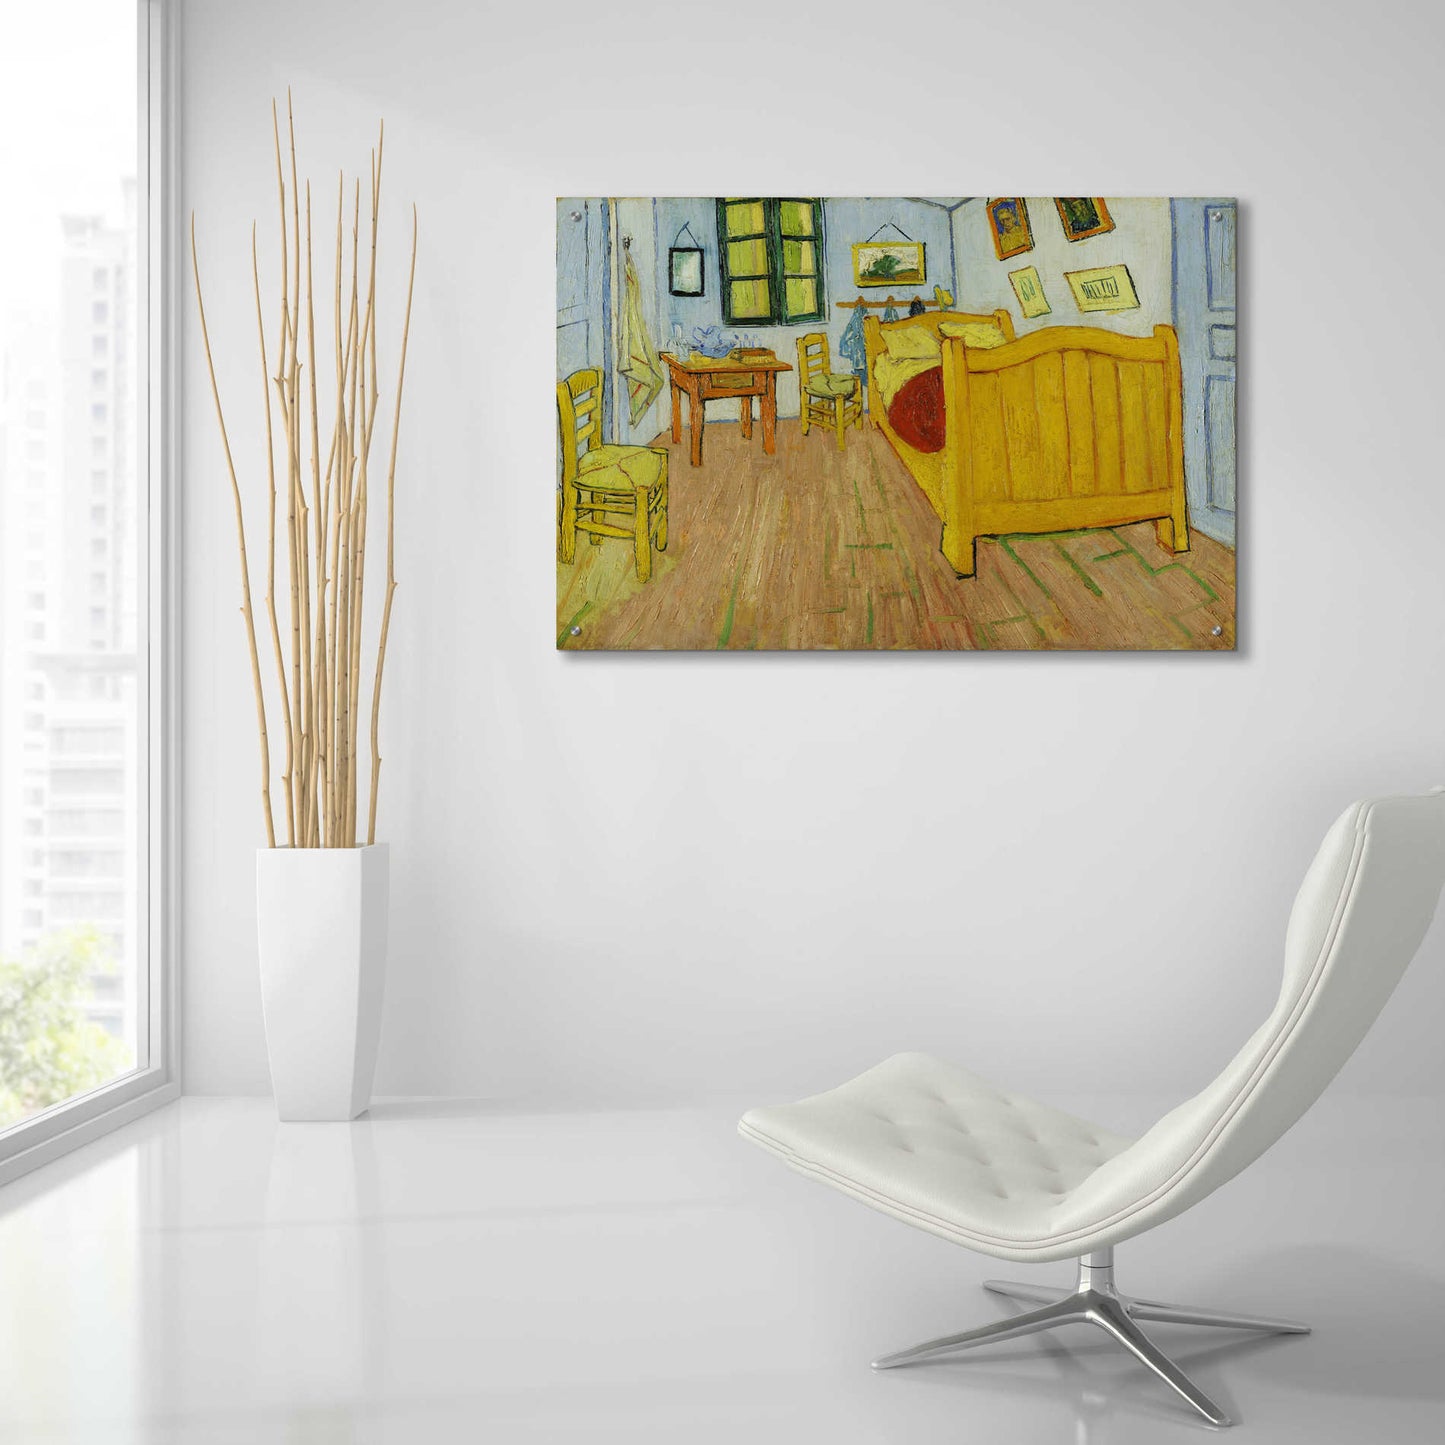 Epic Art 'Bedroom in Arles' by Vincent van Gogh, Acrylic Glass Wall Art,36x24